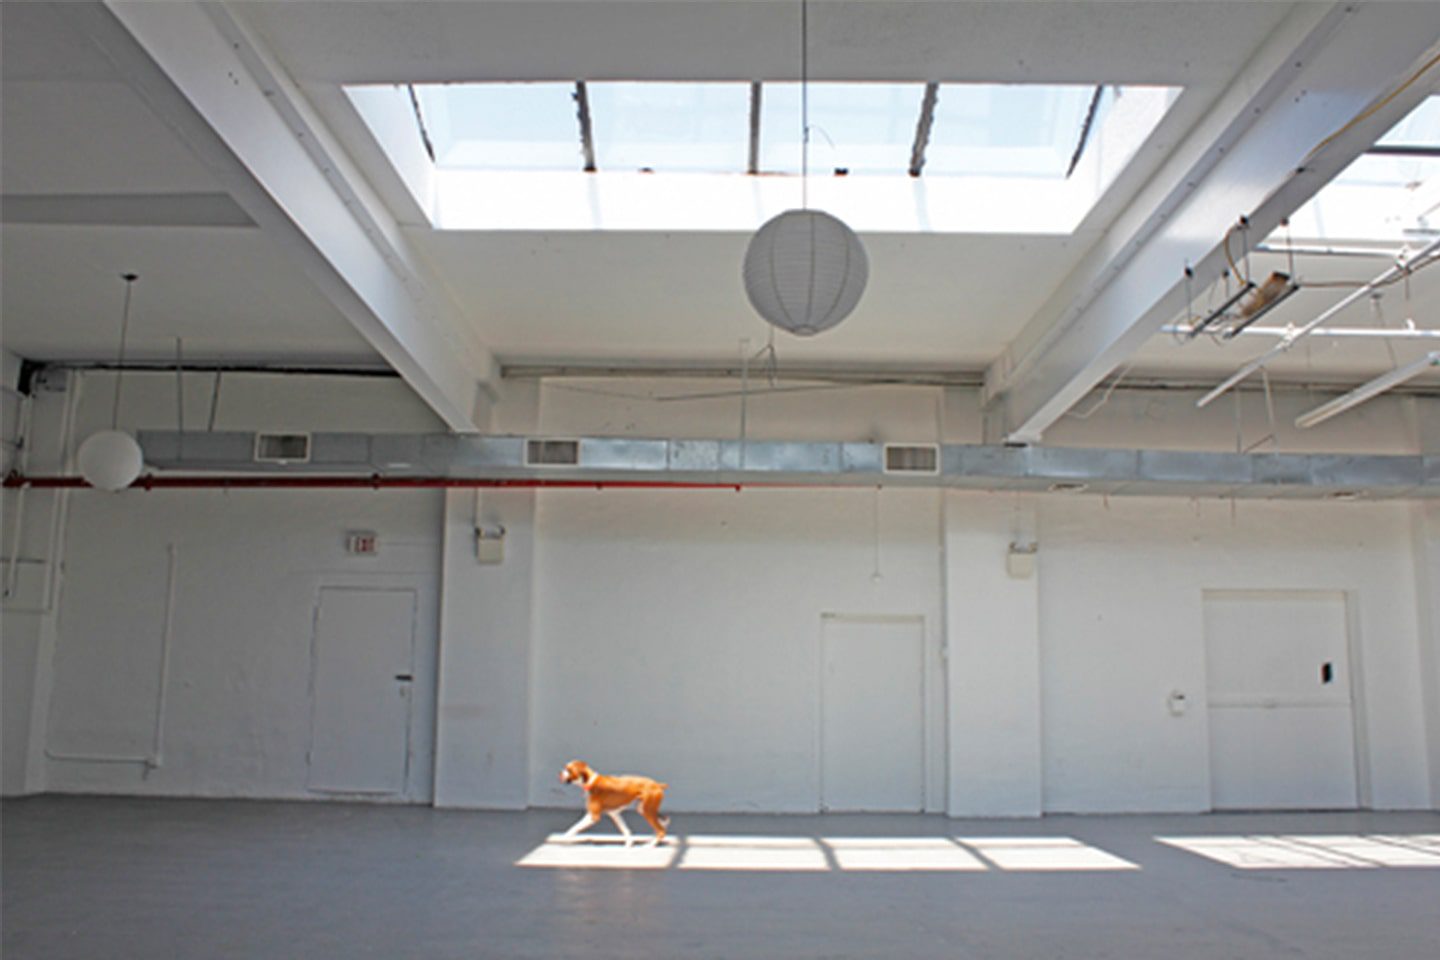 A dog walking in an empty room with white walls.